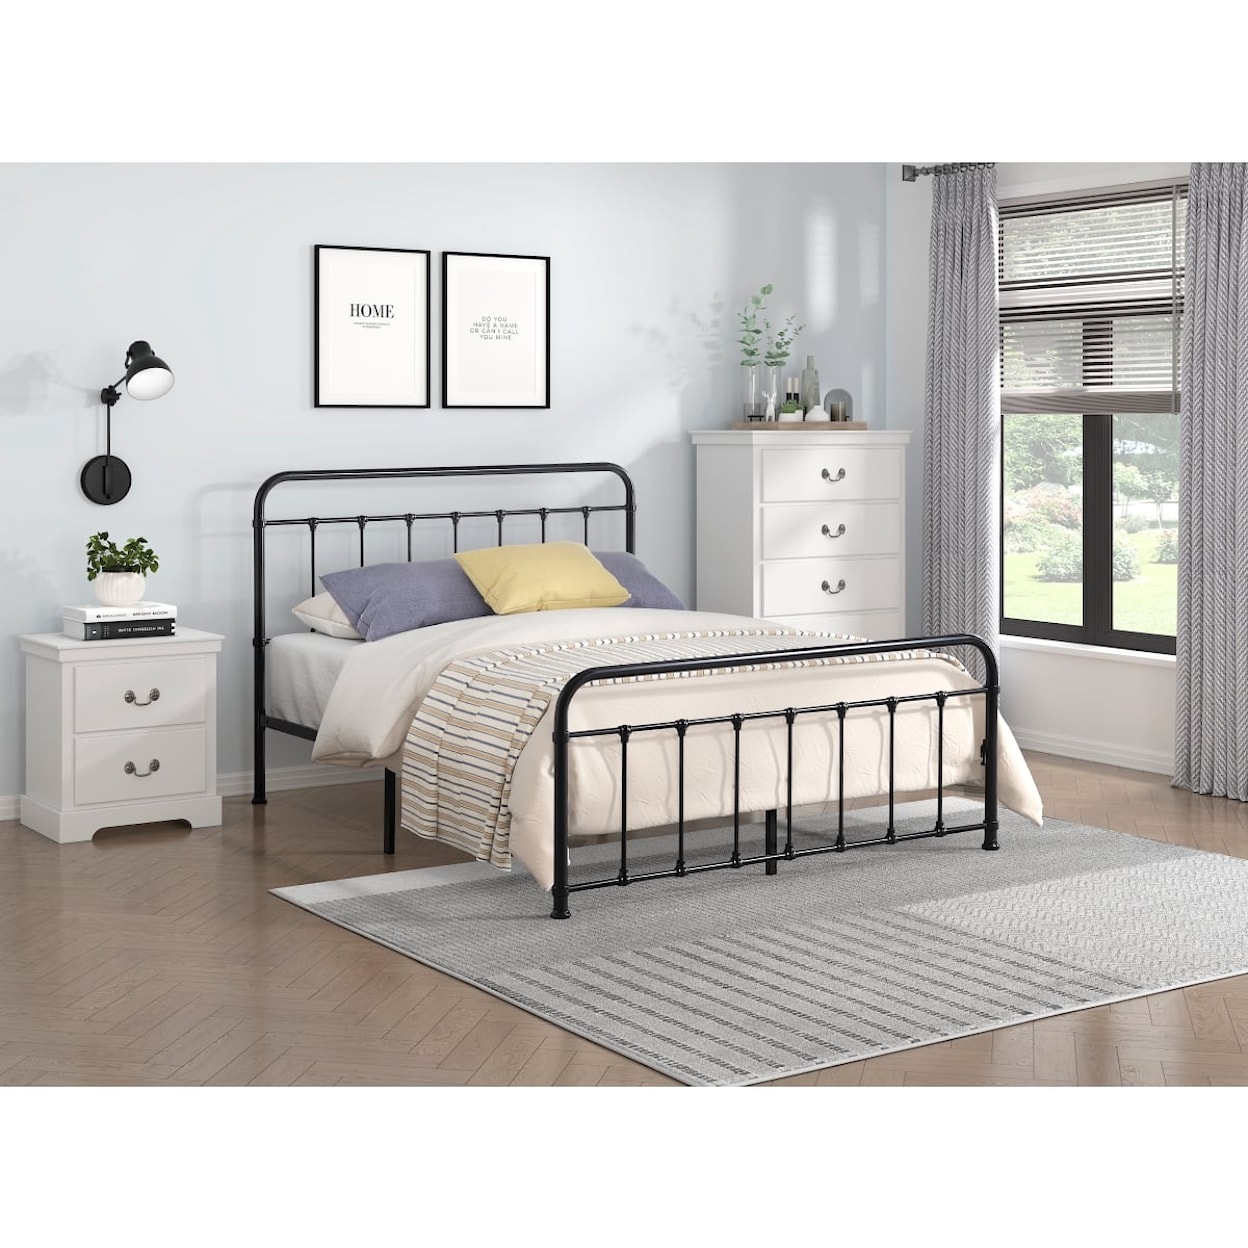 Homelegance Fawn Queen  Bed